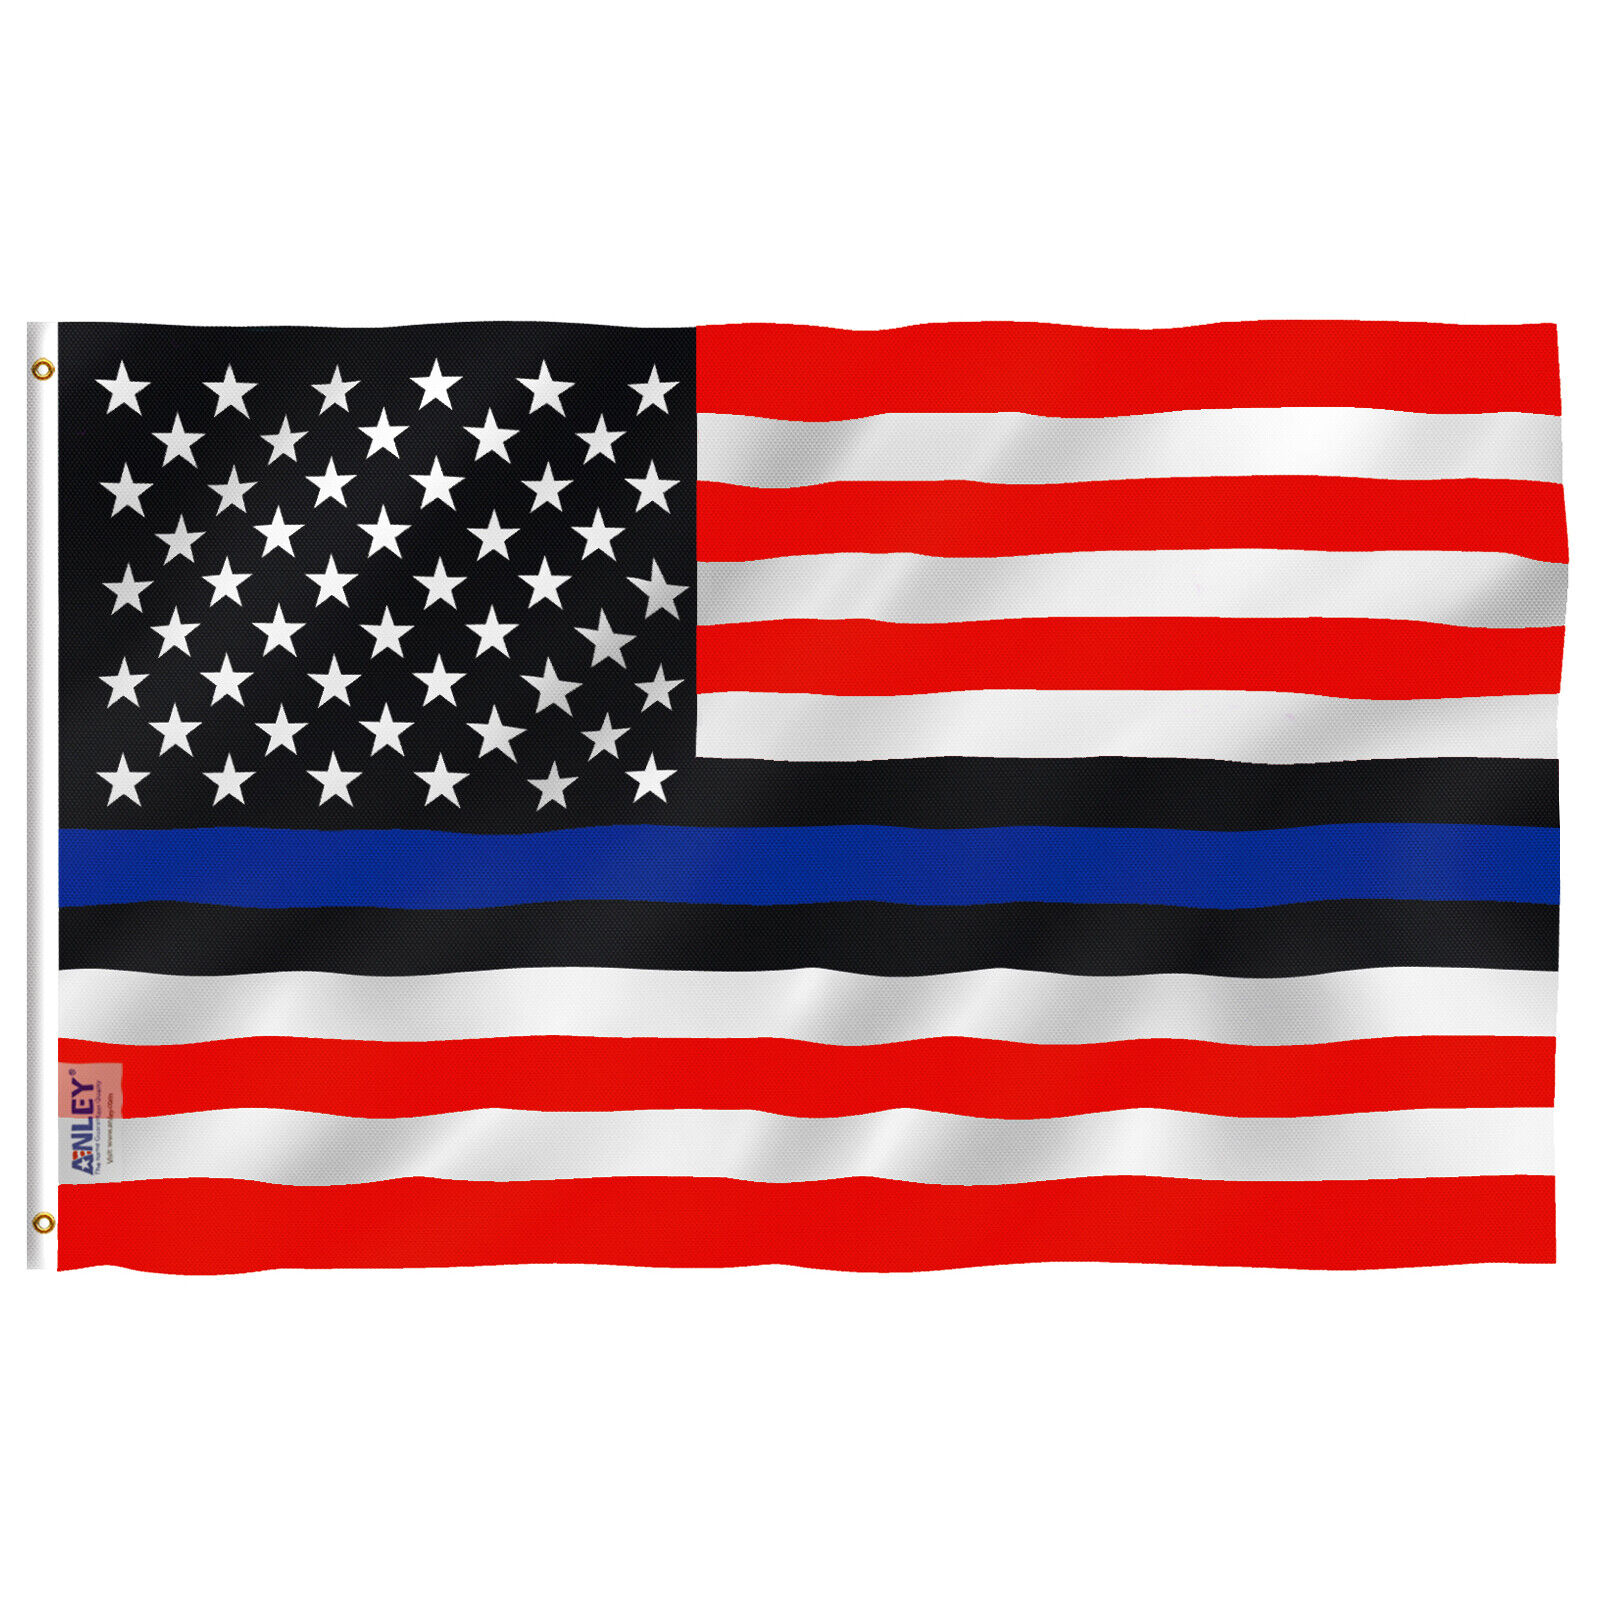 Anley Fly Breeze Blue Lives Matter American Flag Police Flag Thin Blue Line USA